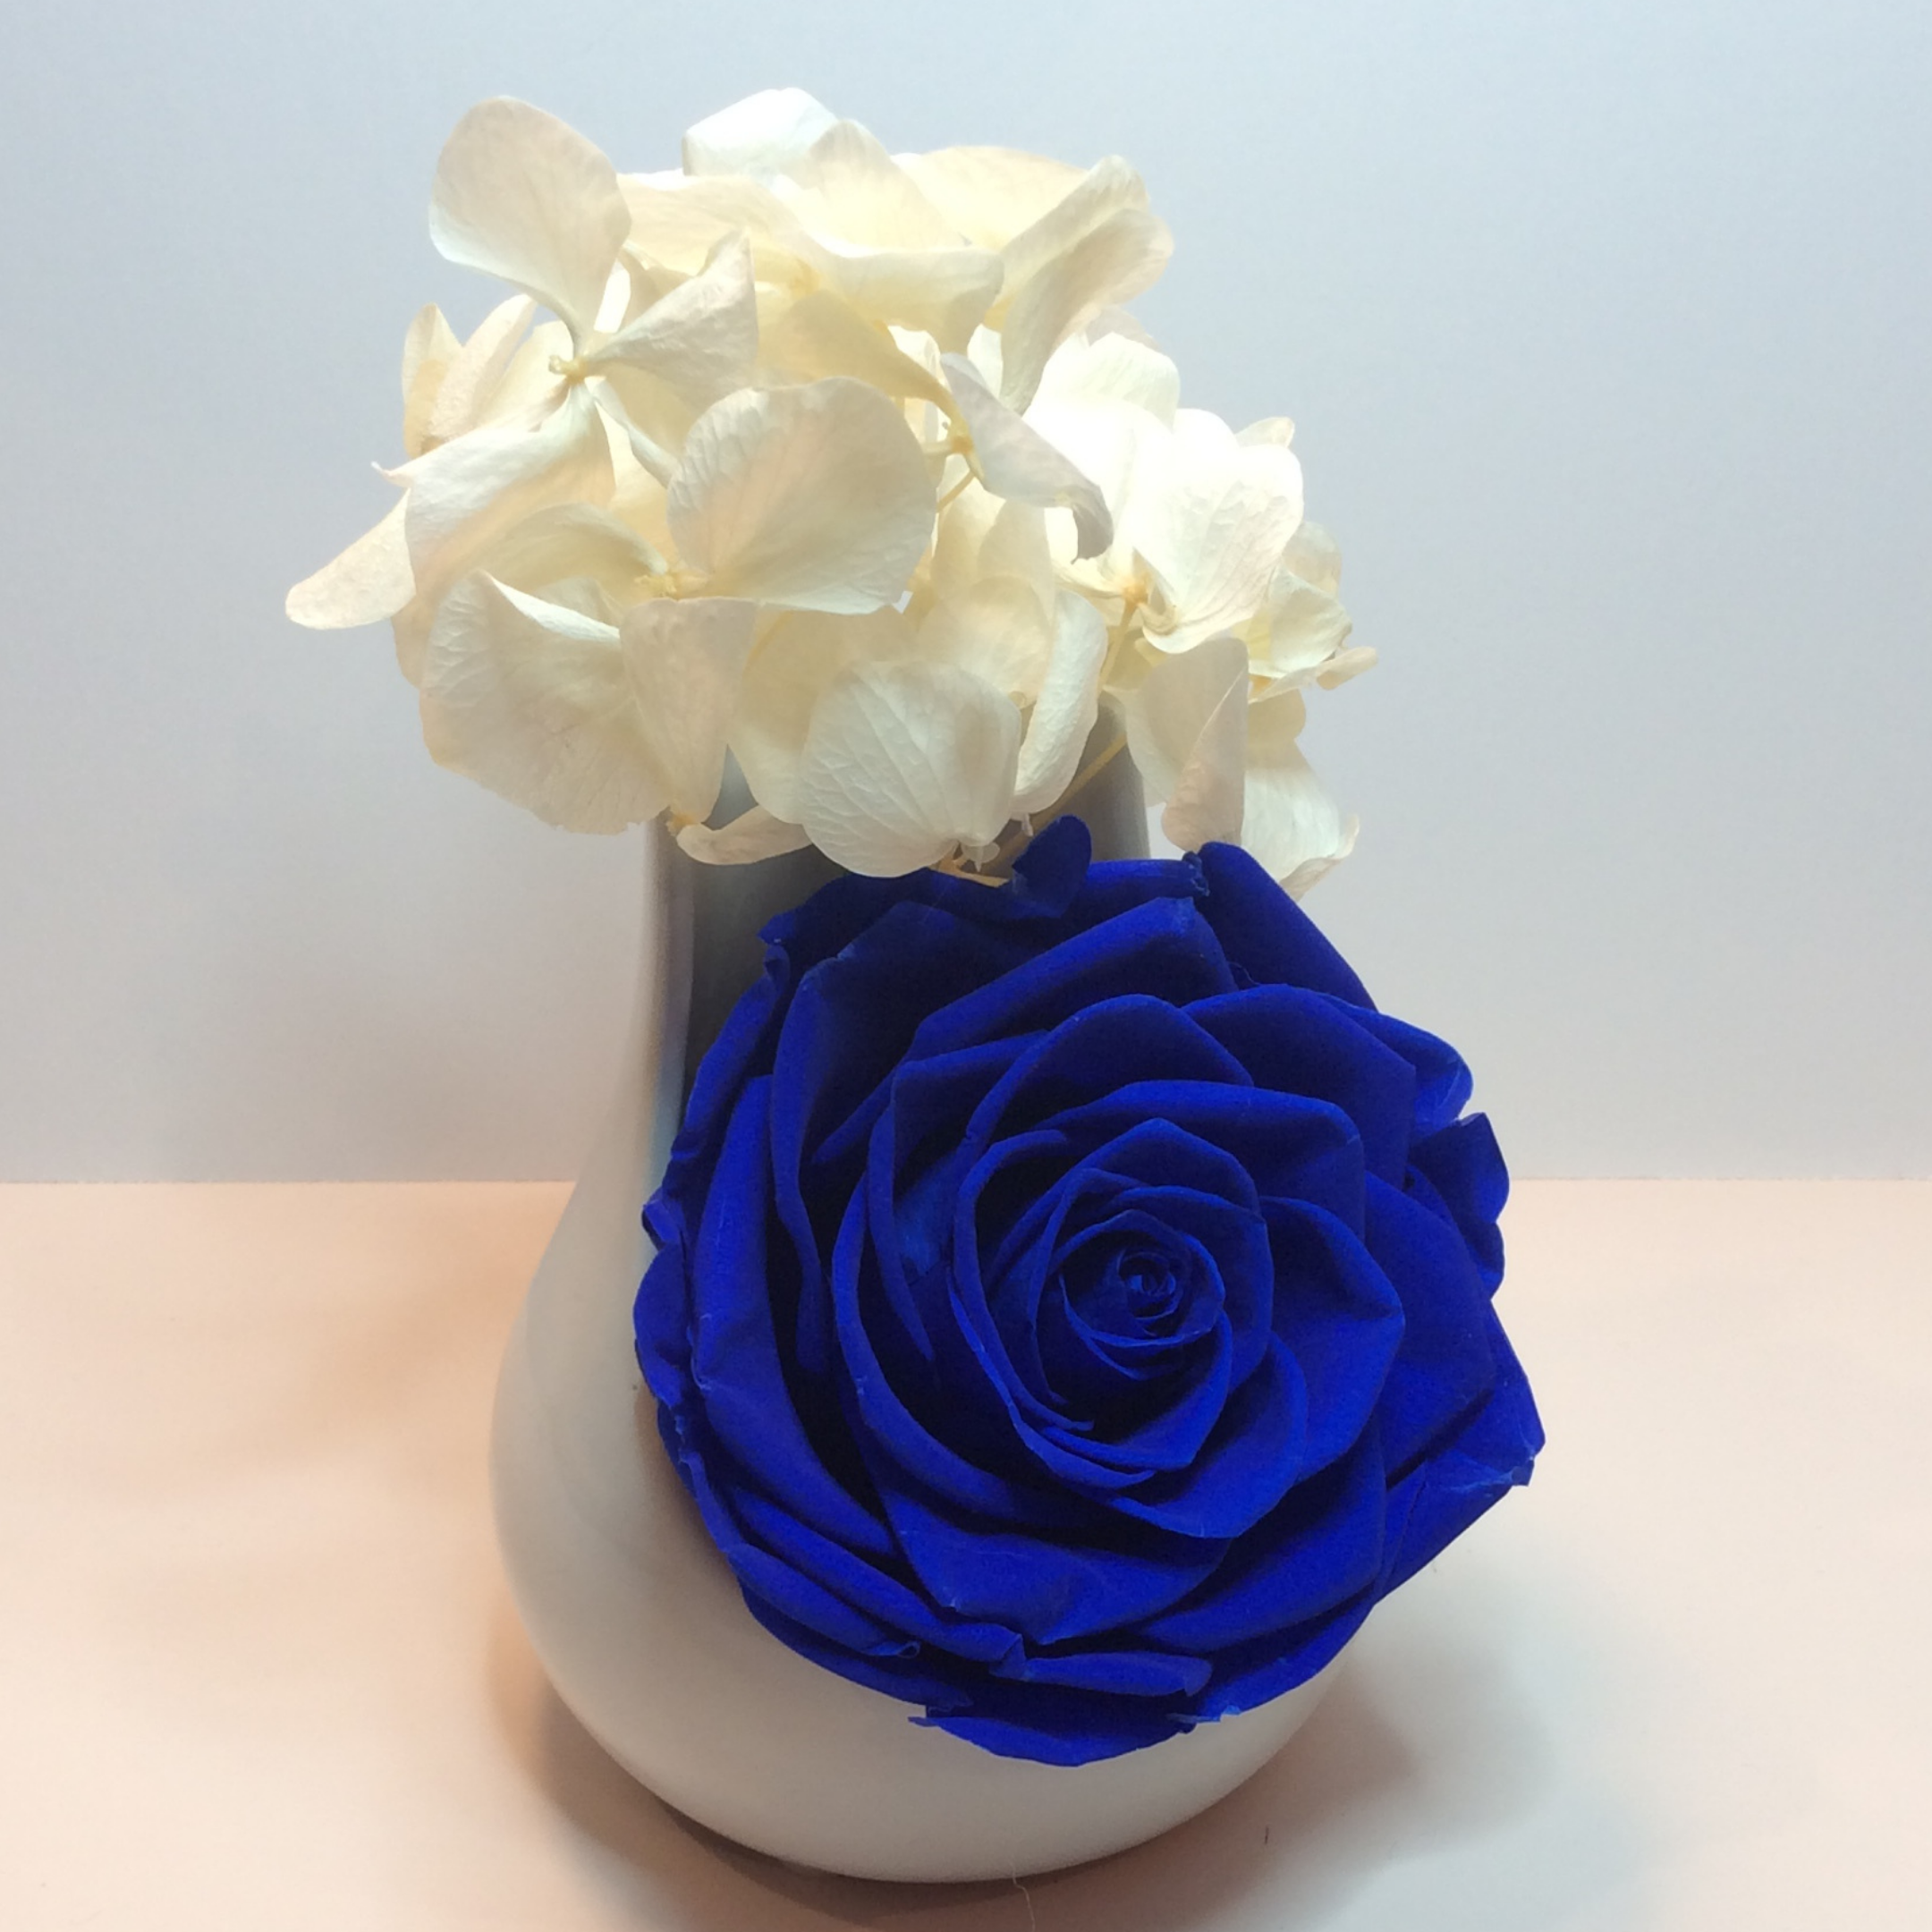 Single XXL Royal Blue Endless Rose encased in a white ceramic terrarium with White Preserved hydrangeas branches on top of the xxl rose. 